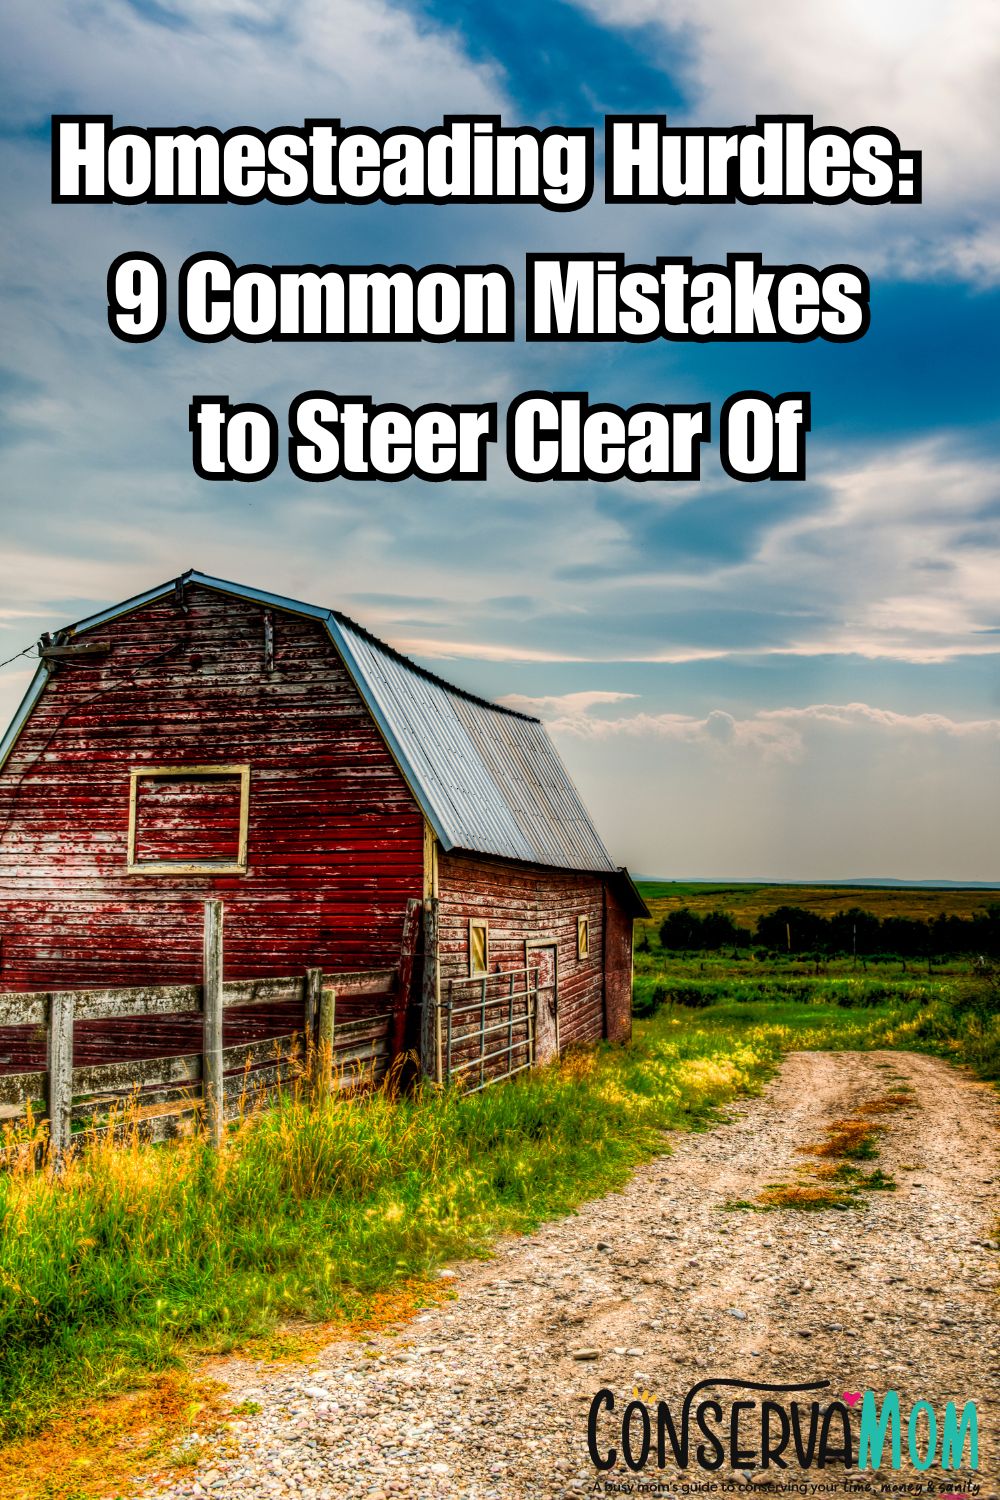 Homesteading Hurdles 9 Common Mistakes to Steer Clear Of